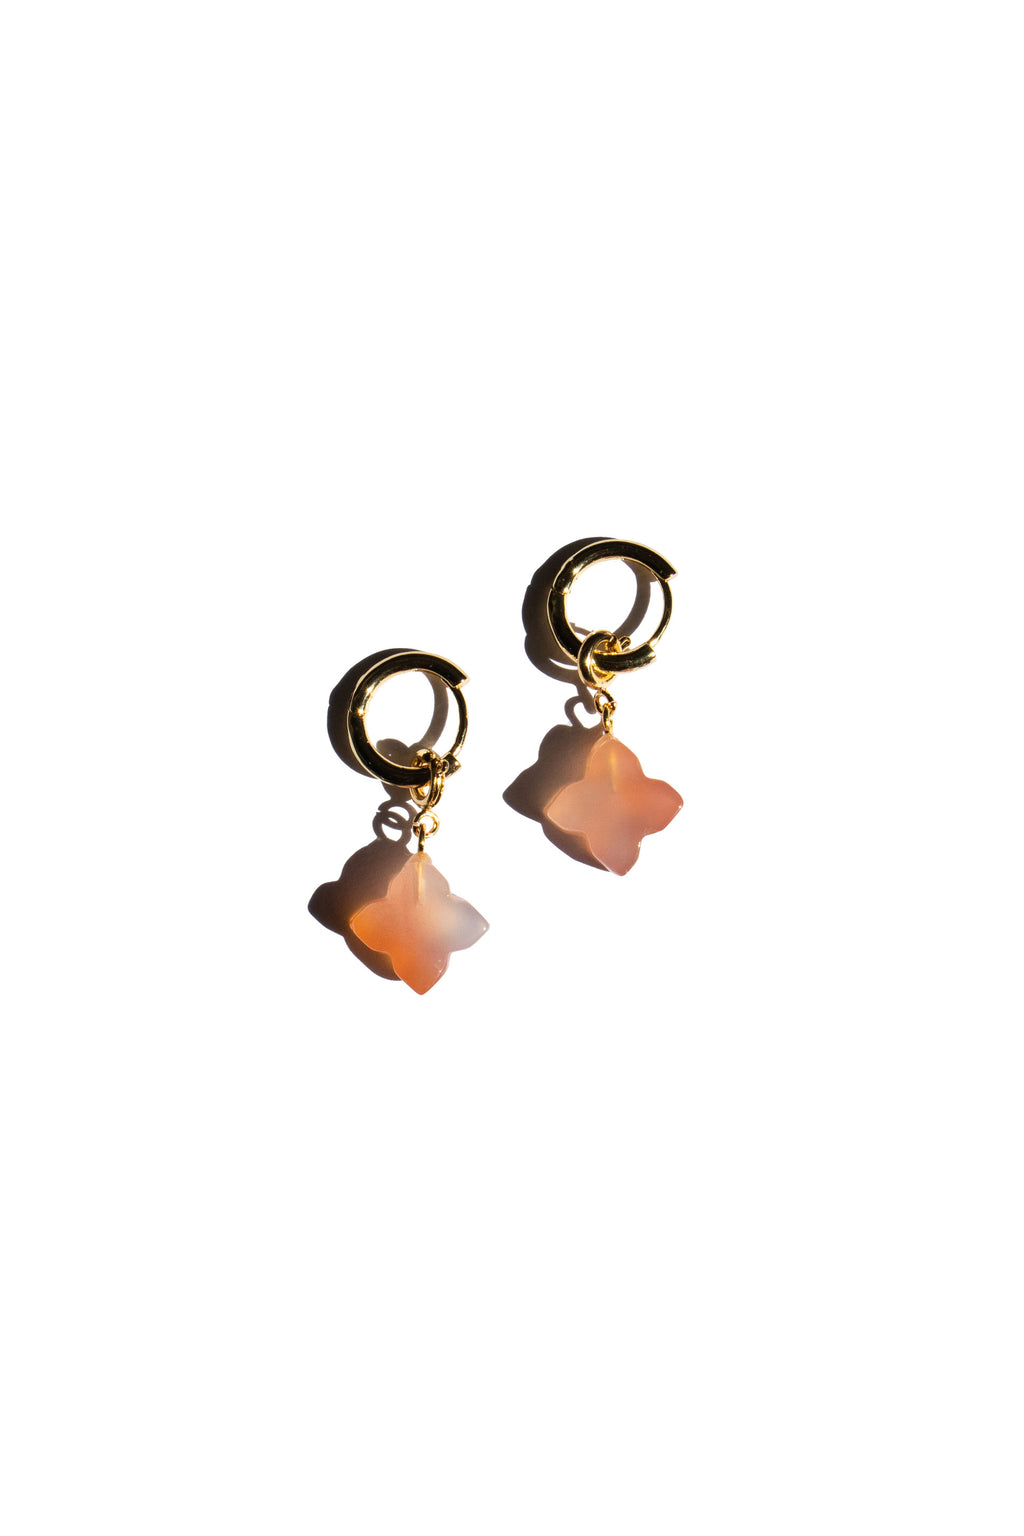 seree-bonbon-earrings-with-cross-charms-in-pink-agate